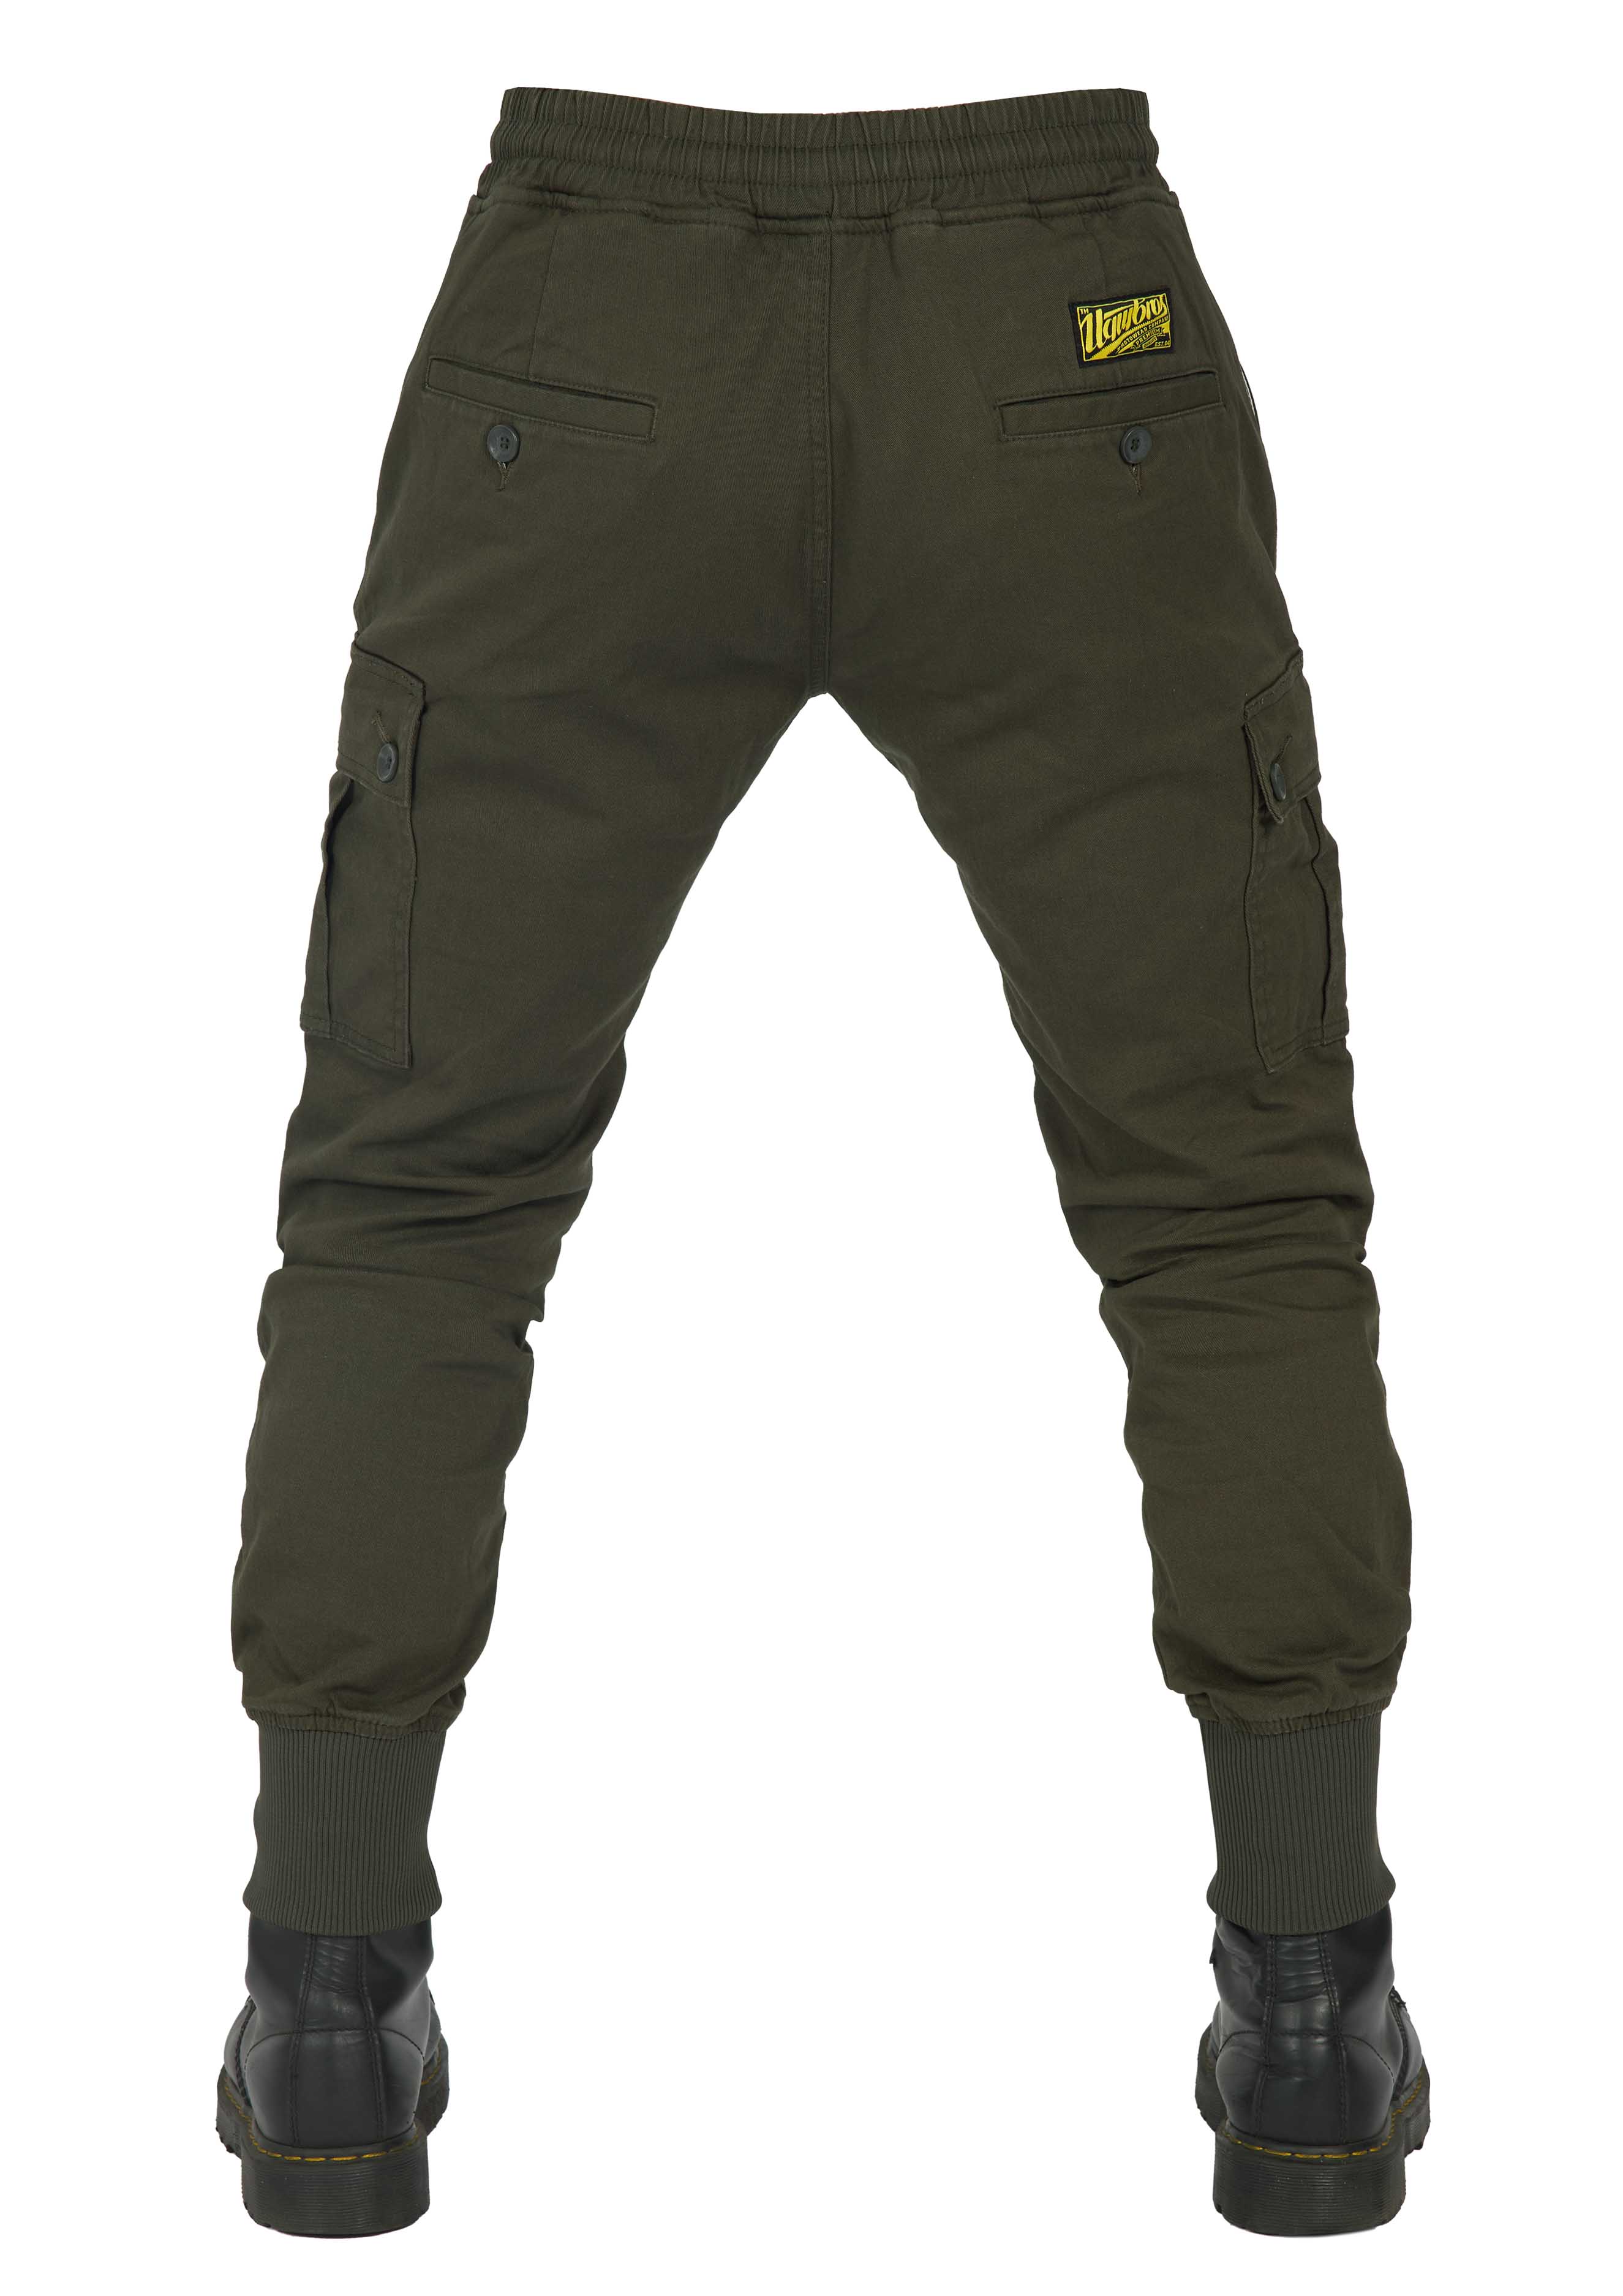 JOGGER-K2 World's first Jogger riding pants with Aramid reinforced ...